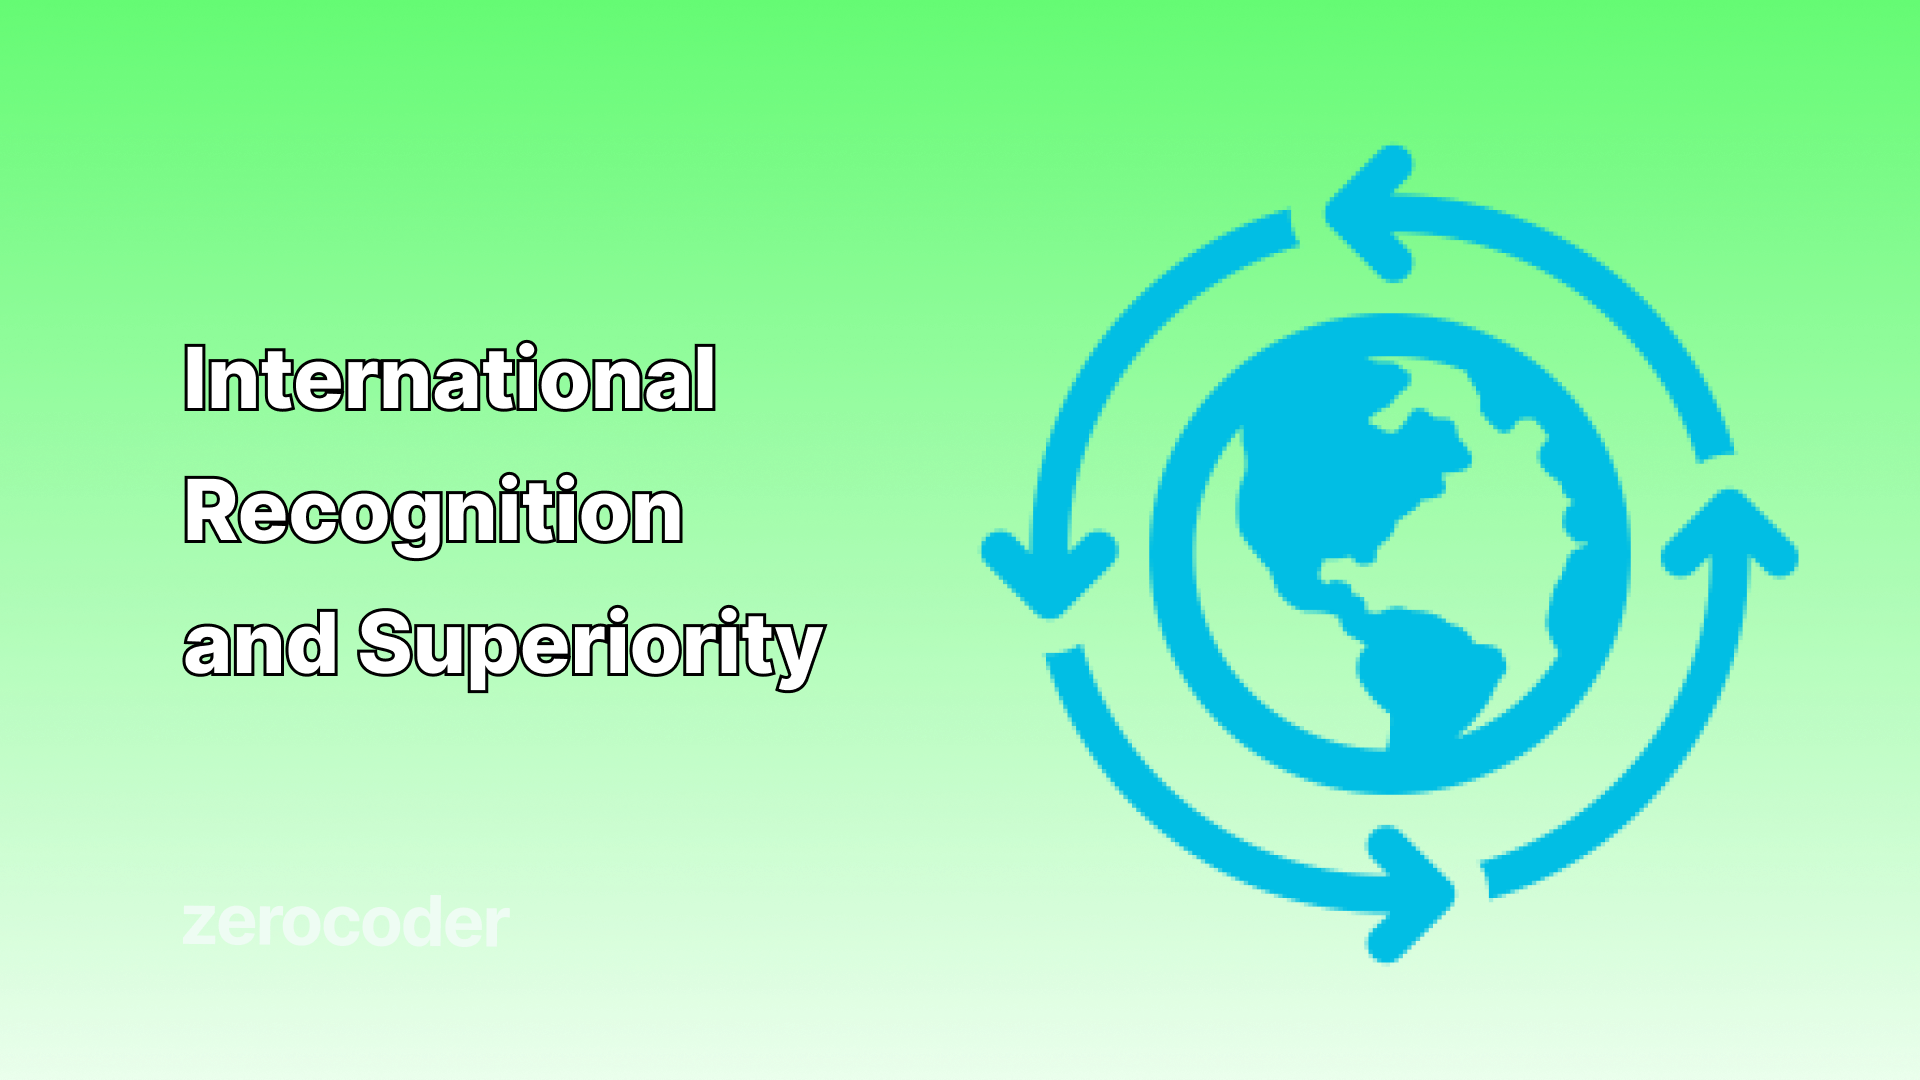 International Recognition and Superiority